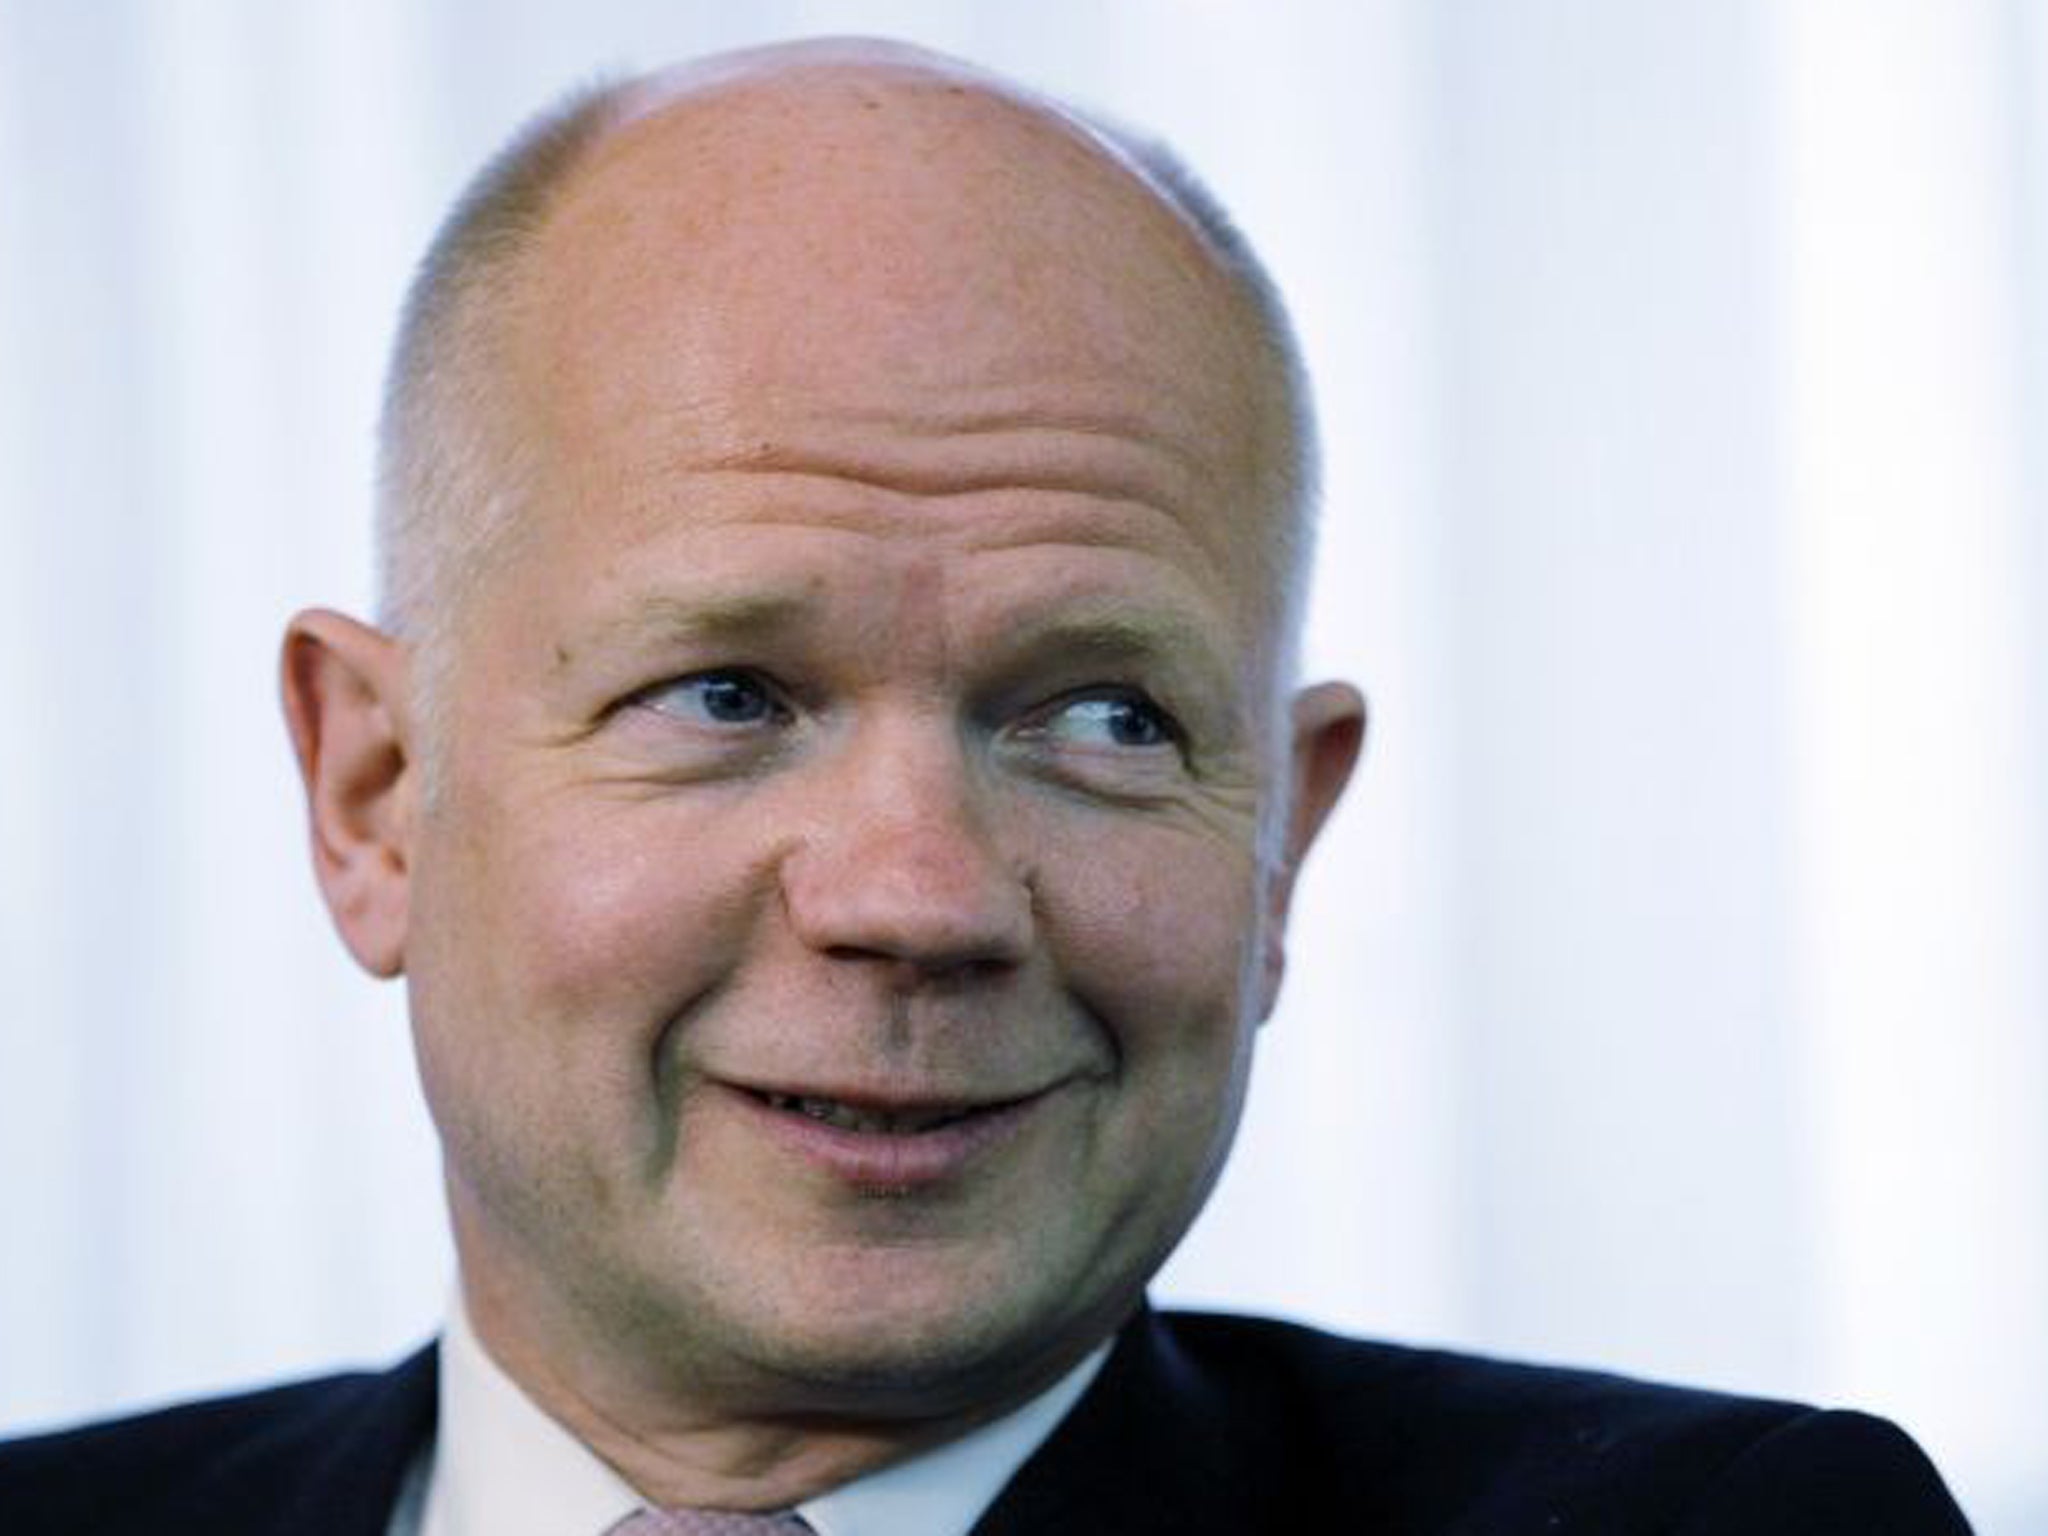 William Hague argued that the move would boost the democratic accountability of the national parliaments in the EU’s 27 member states